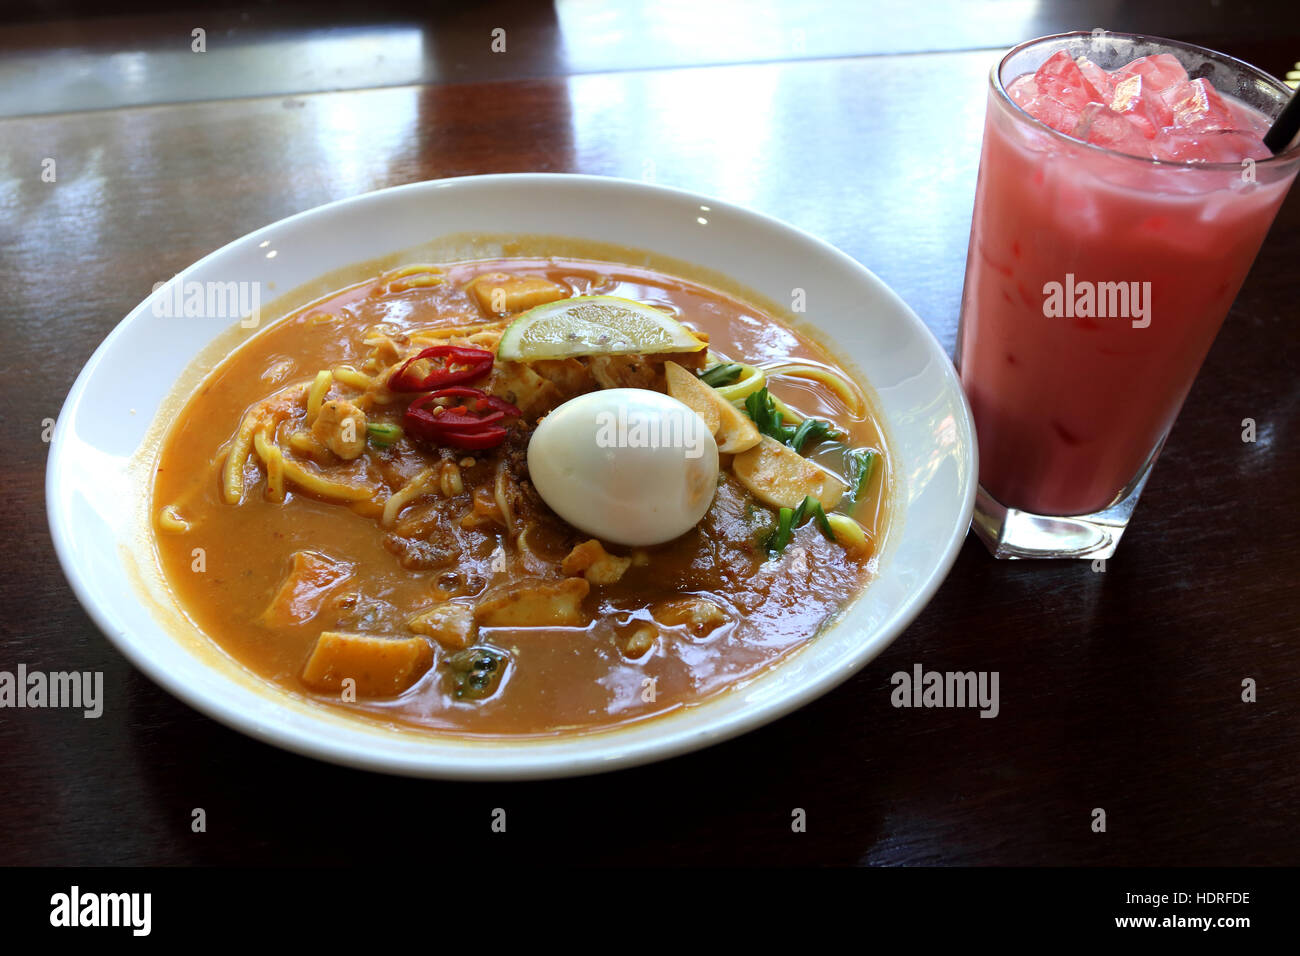 A bowl of Curry Laksa noodles, one of  Malaysians authentic dish with a glass of Milky Rose water syrup drink called Air Bandung Stock Photo